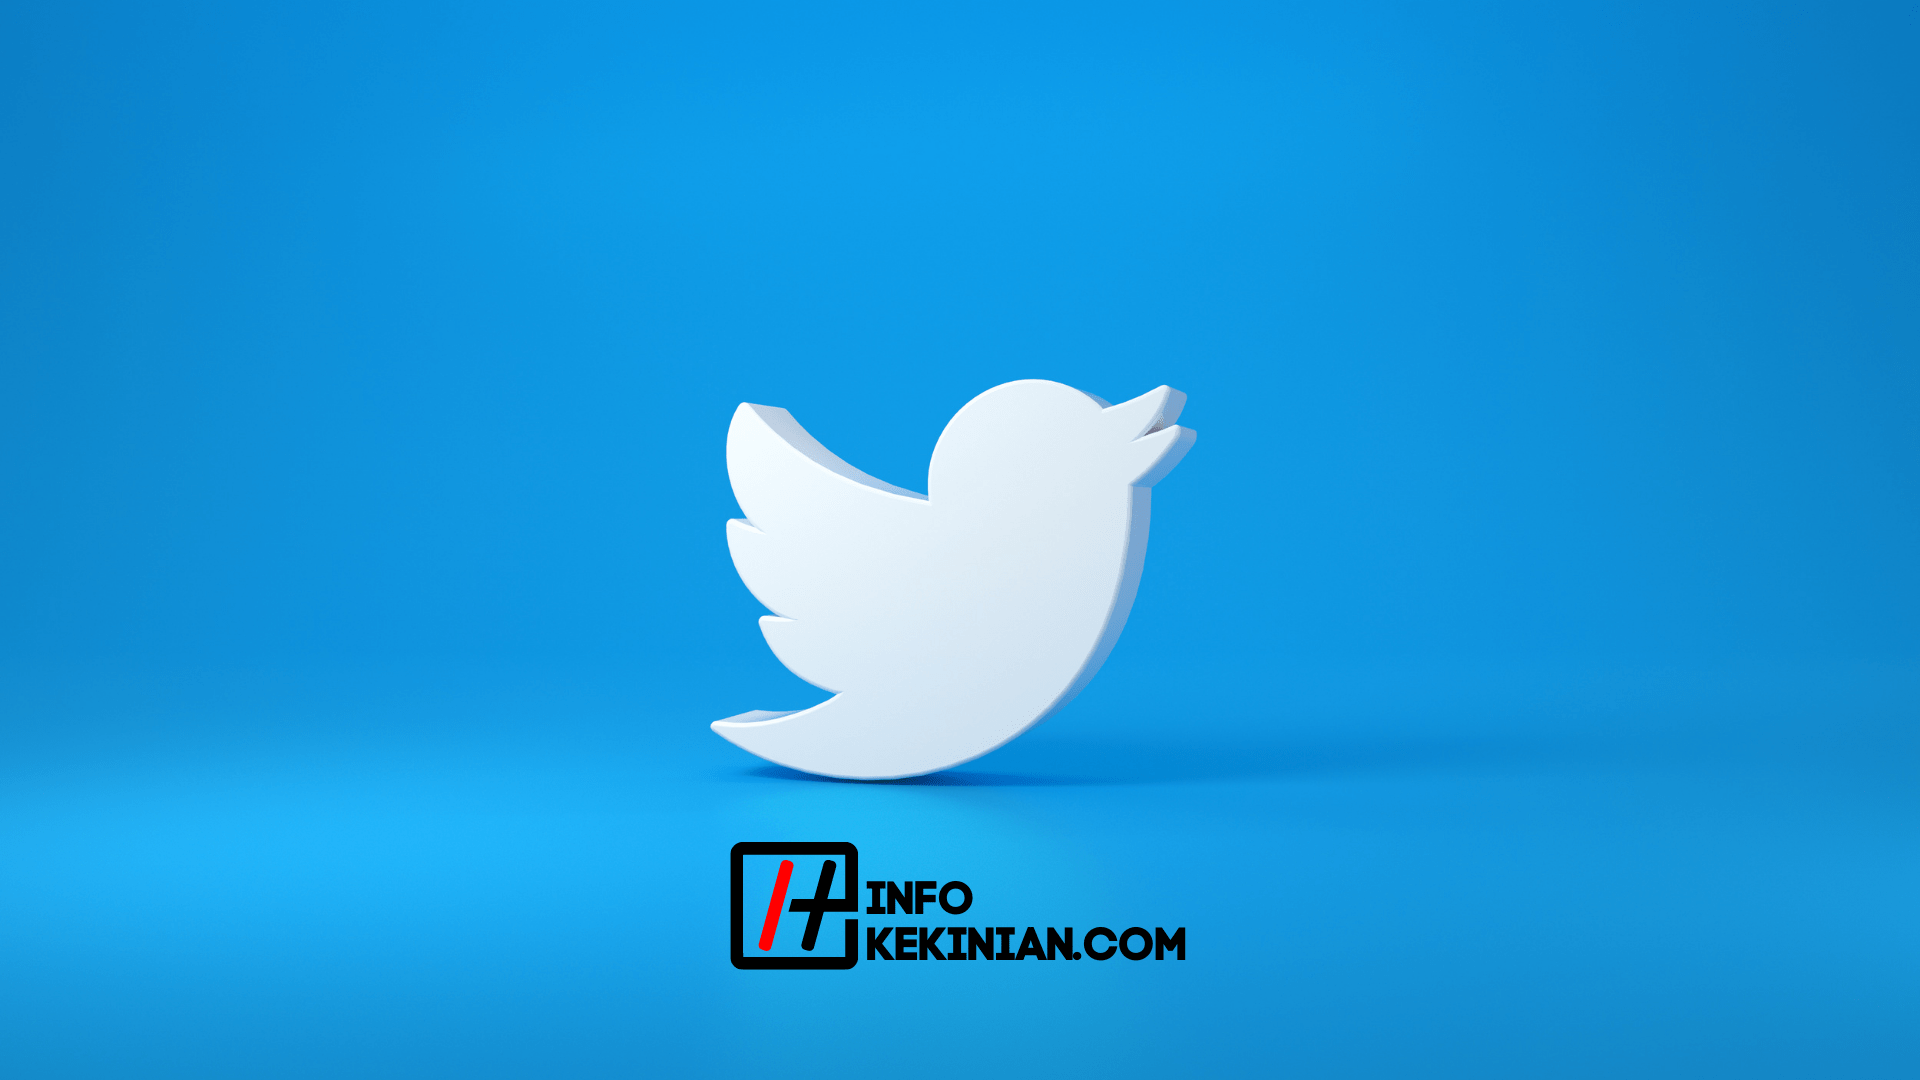 The image is a 3D rendering of the Twitter logo, which is a bird facing right with its mouth open, against a blue background. The logo is at the top center of the image. The text "INFO KEKINIAN.COM" is at the bottom center of the image. The image represents the search query 'Cara download video Twitter tanpa aplikasi'.